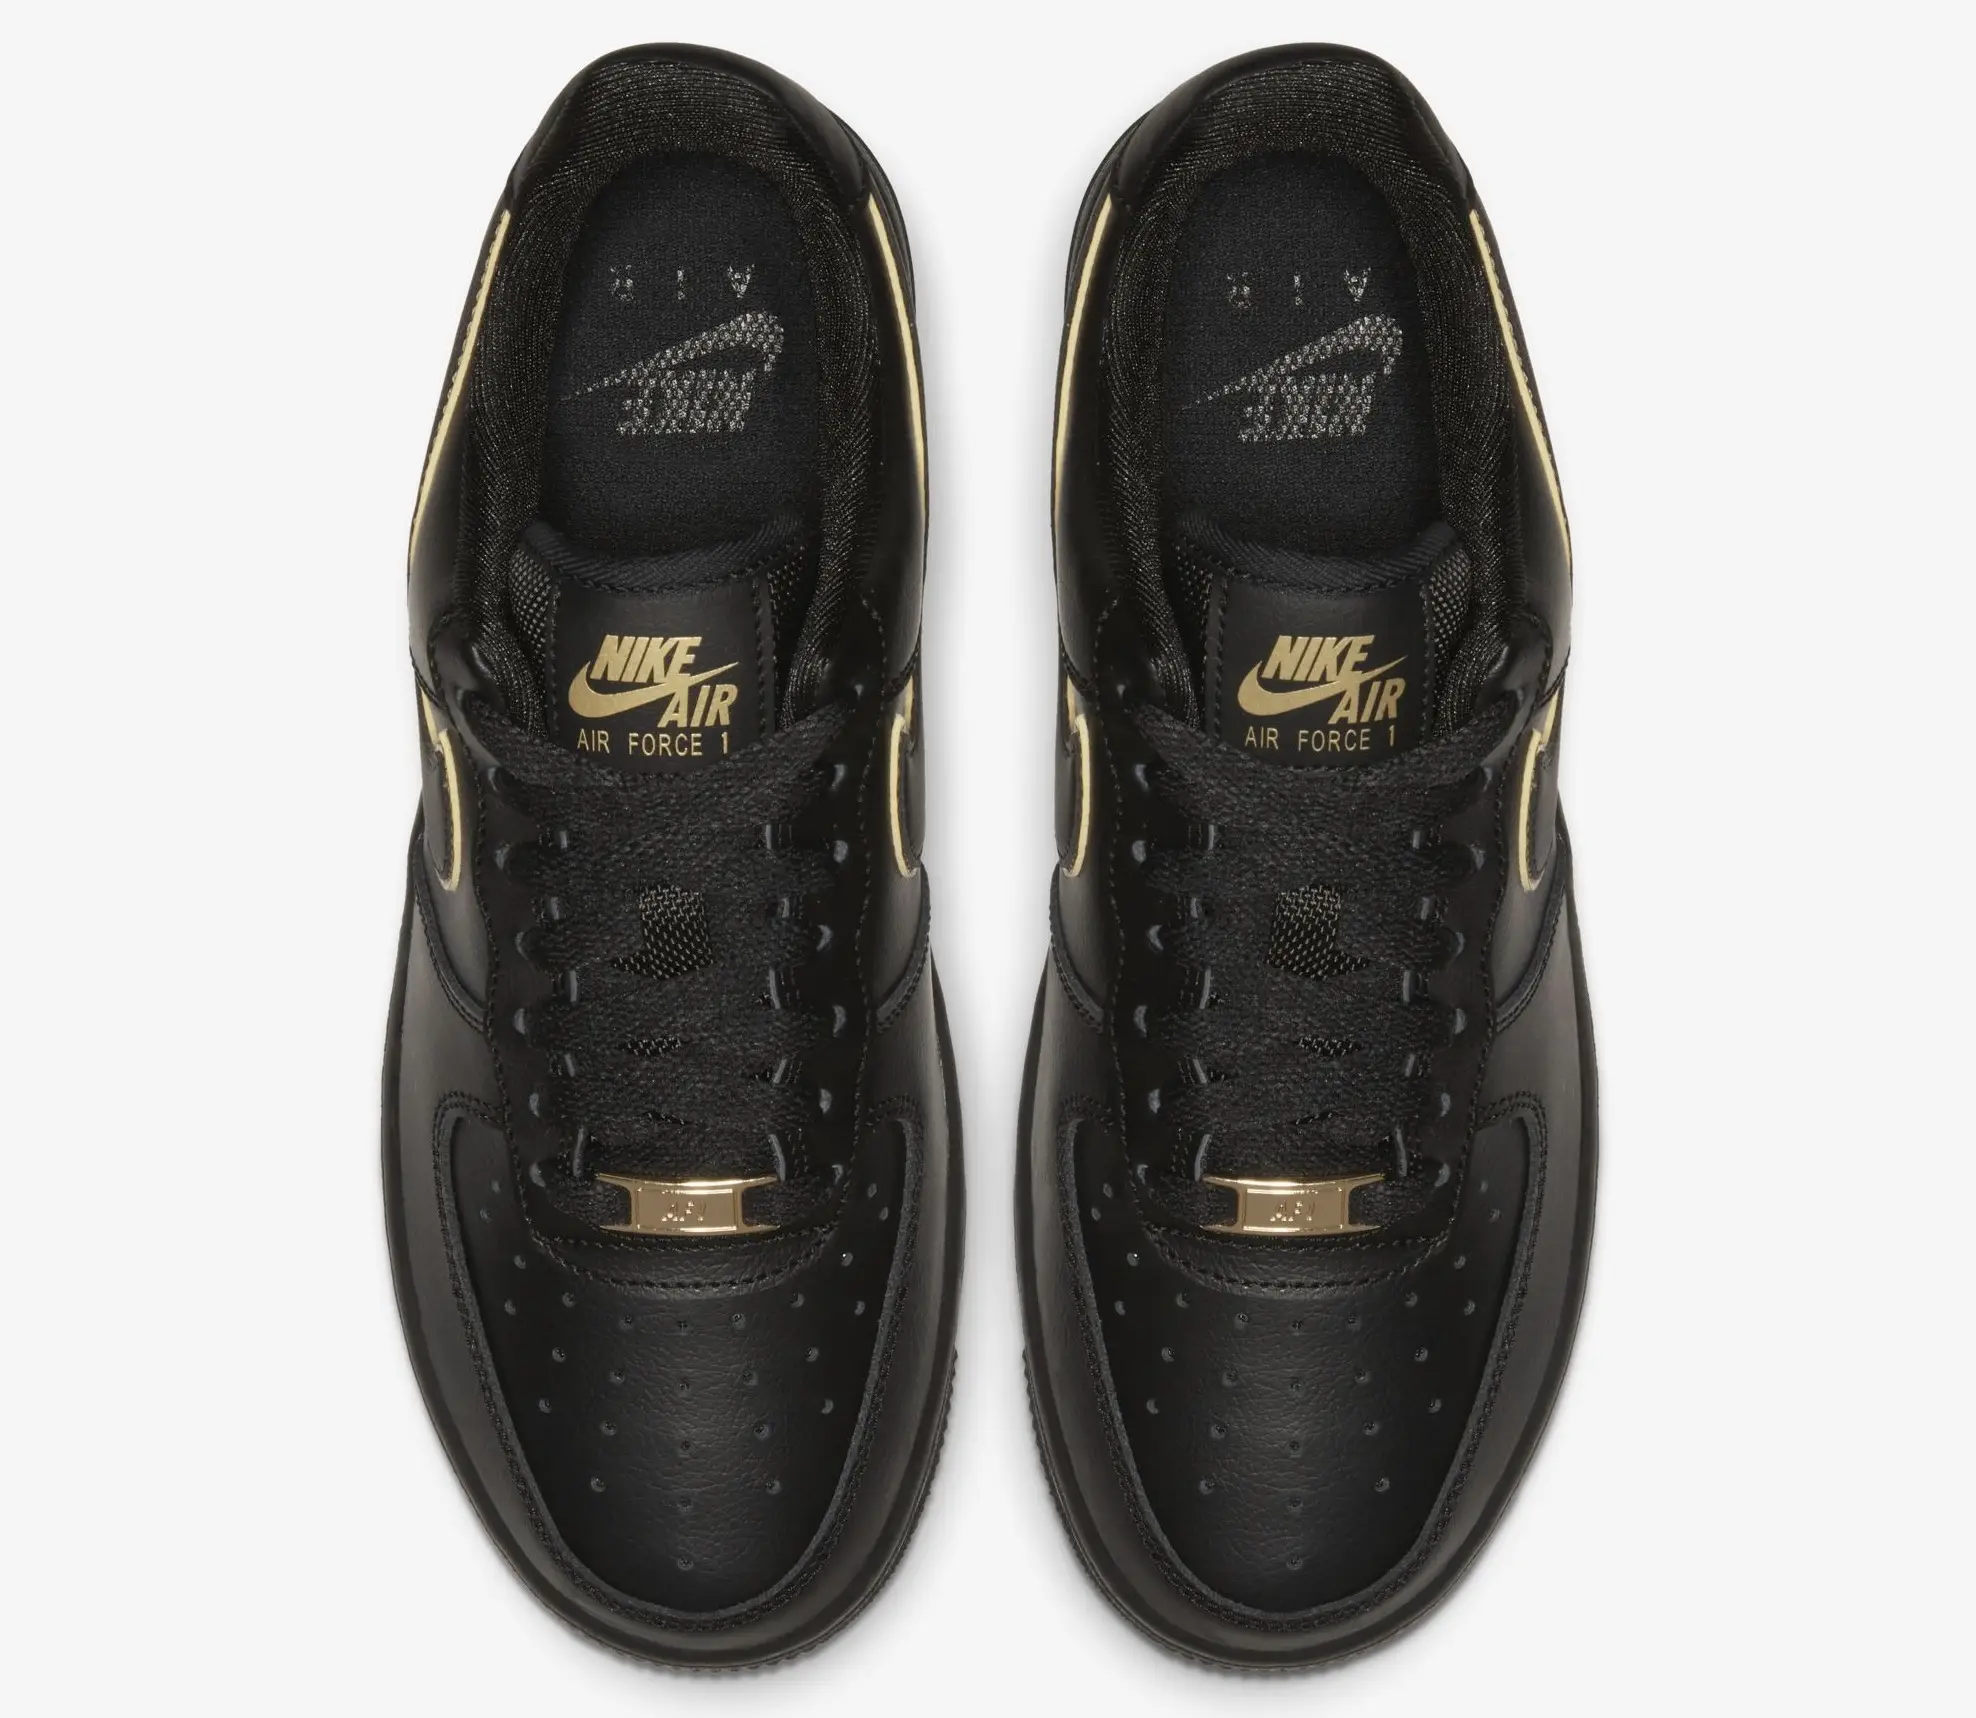 The Next Metallic Air Force 1 Gets Unveiled In Black And Gold | The ...